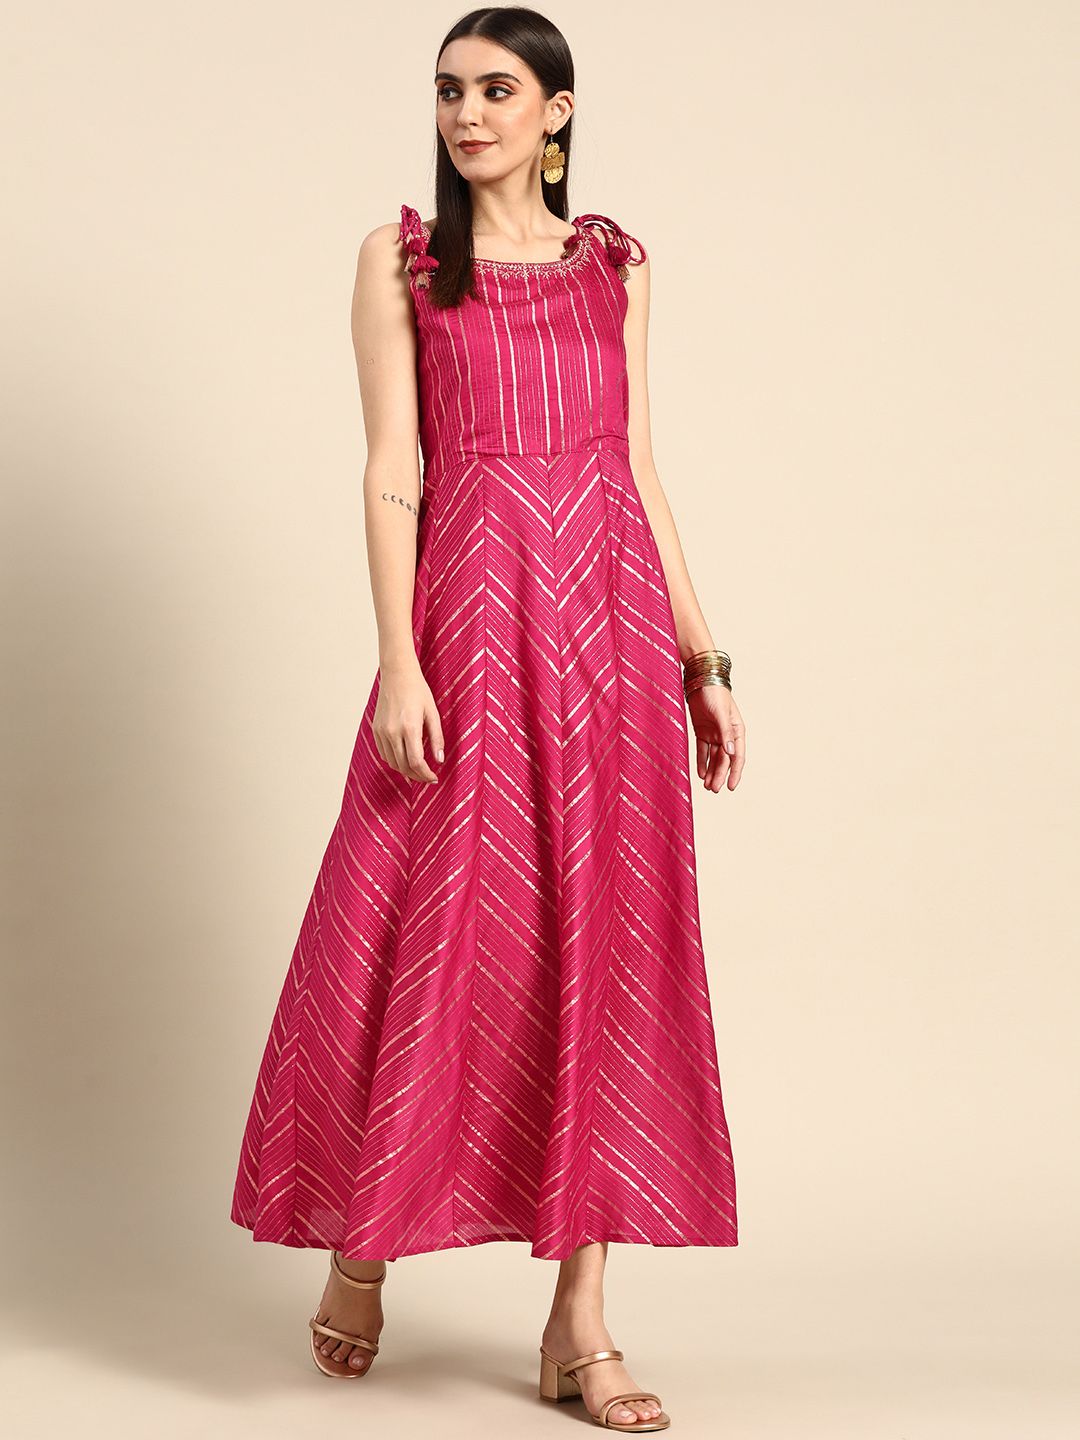 Anouk Pink & Golden Striped Ethnic A-Line Maxi Dress Price in India